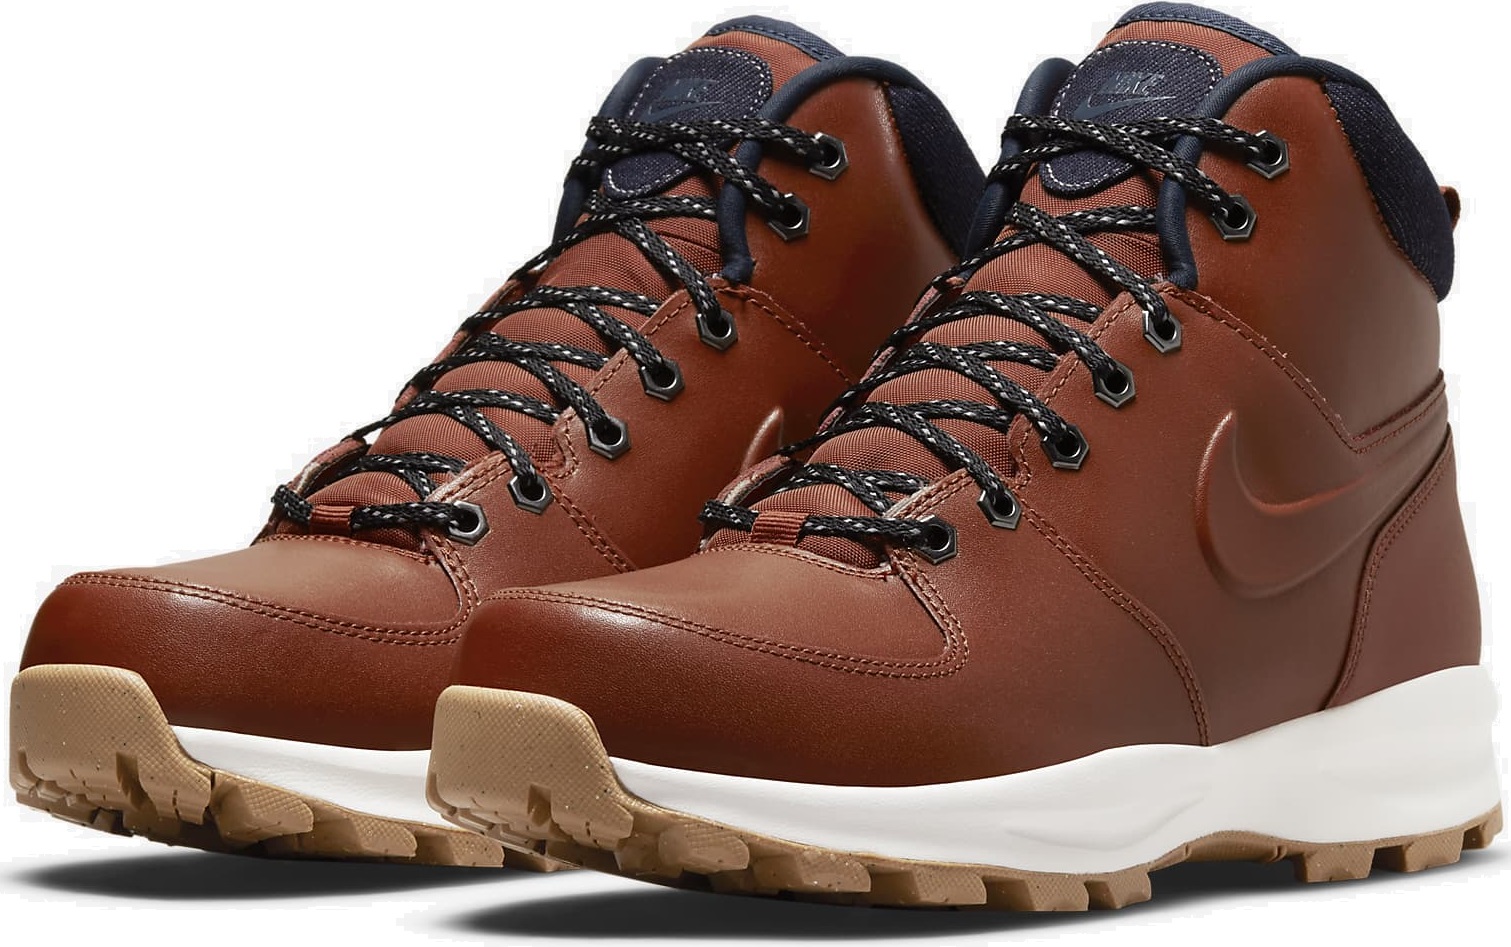 Nike Manoa Leather SE ($71.98 after ACCESS20 coupon code and Membership Free  Shipping - Free to